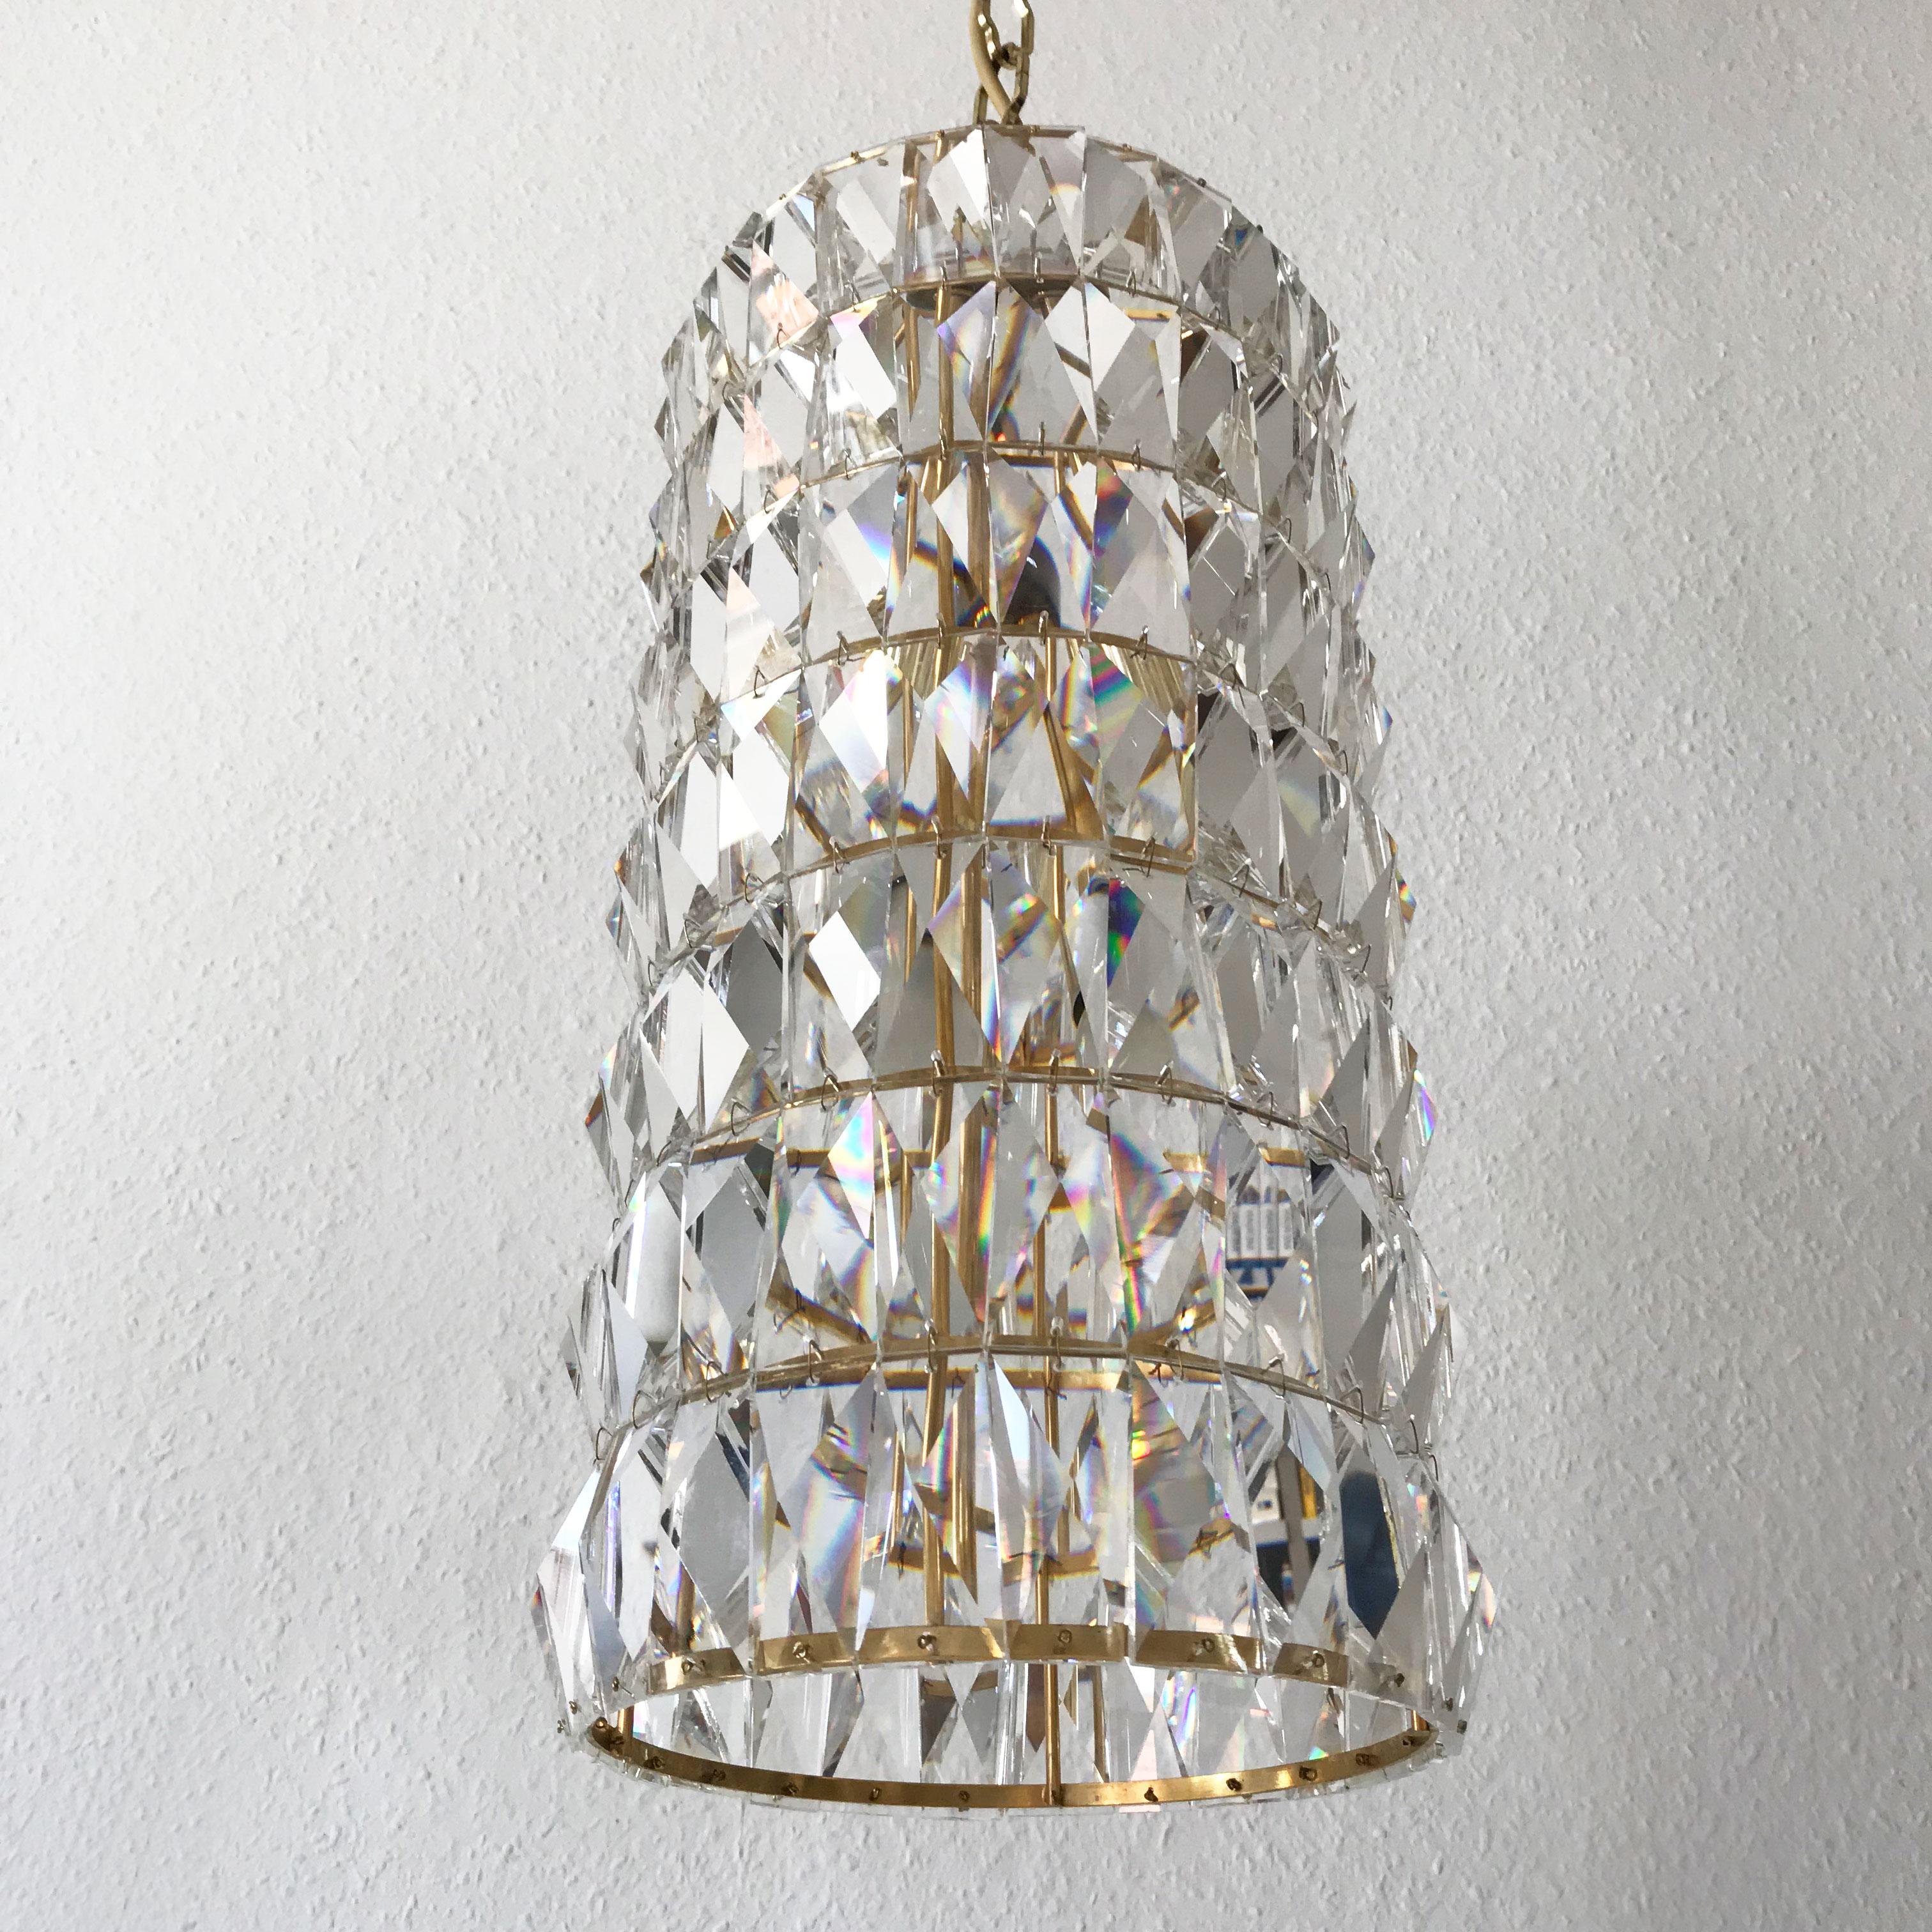 Mid-20th Century Crystal Glass Pendant Lamp or Chandelier by Bakalowits & Söhne Vienna Austria For Sale